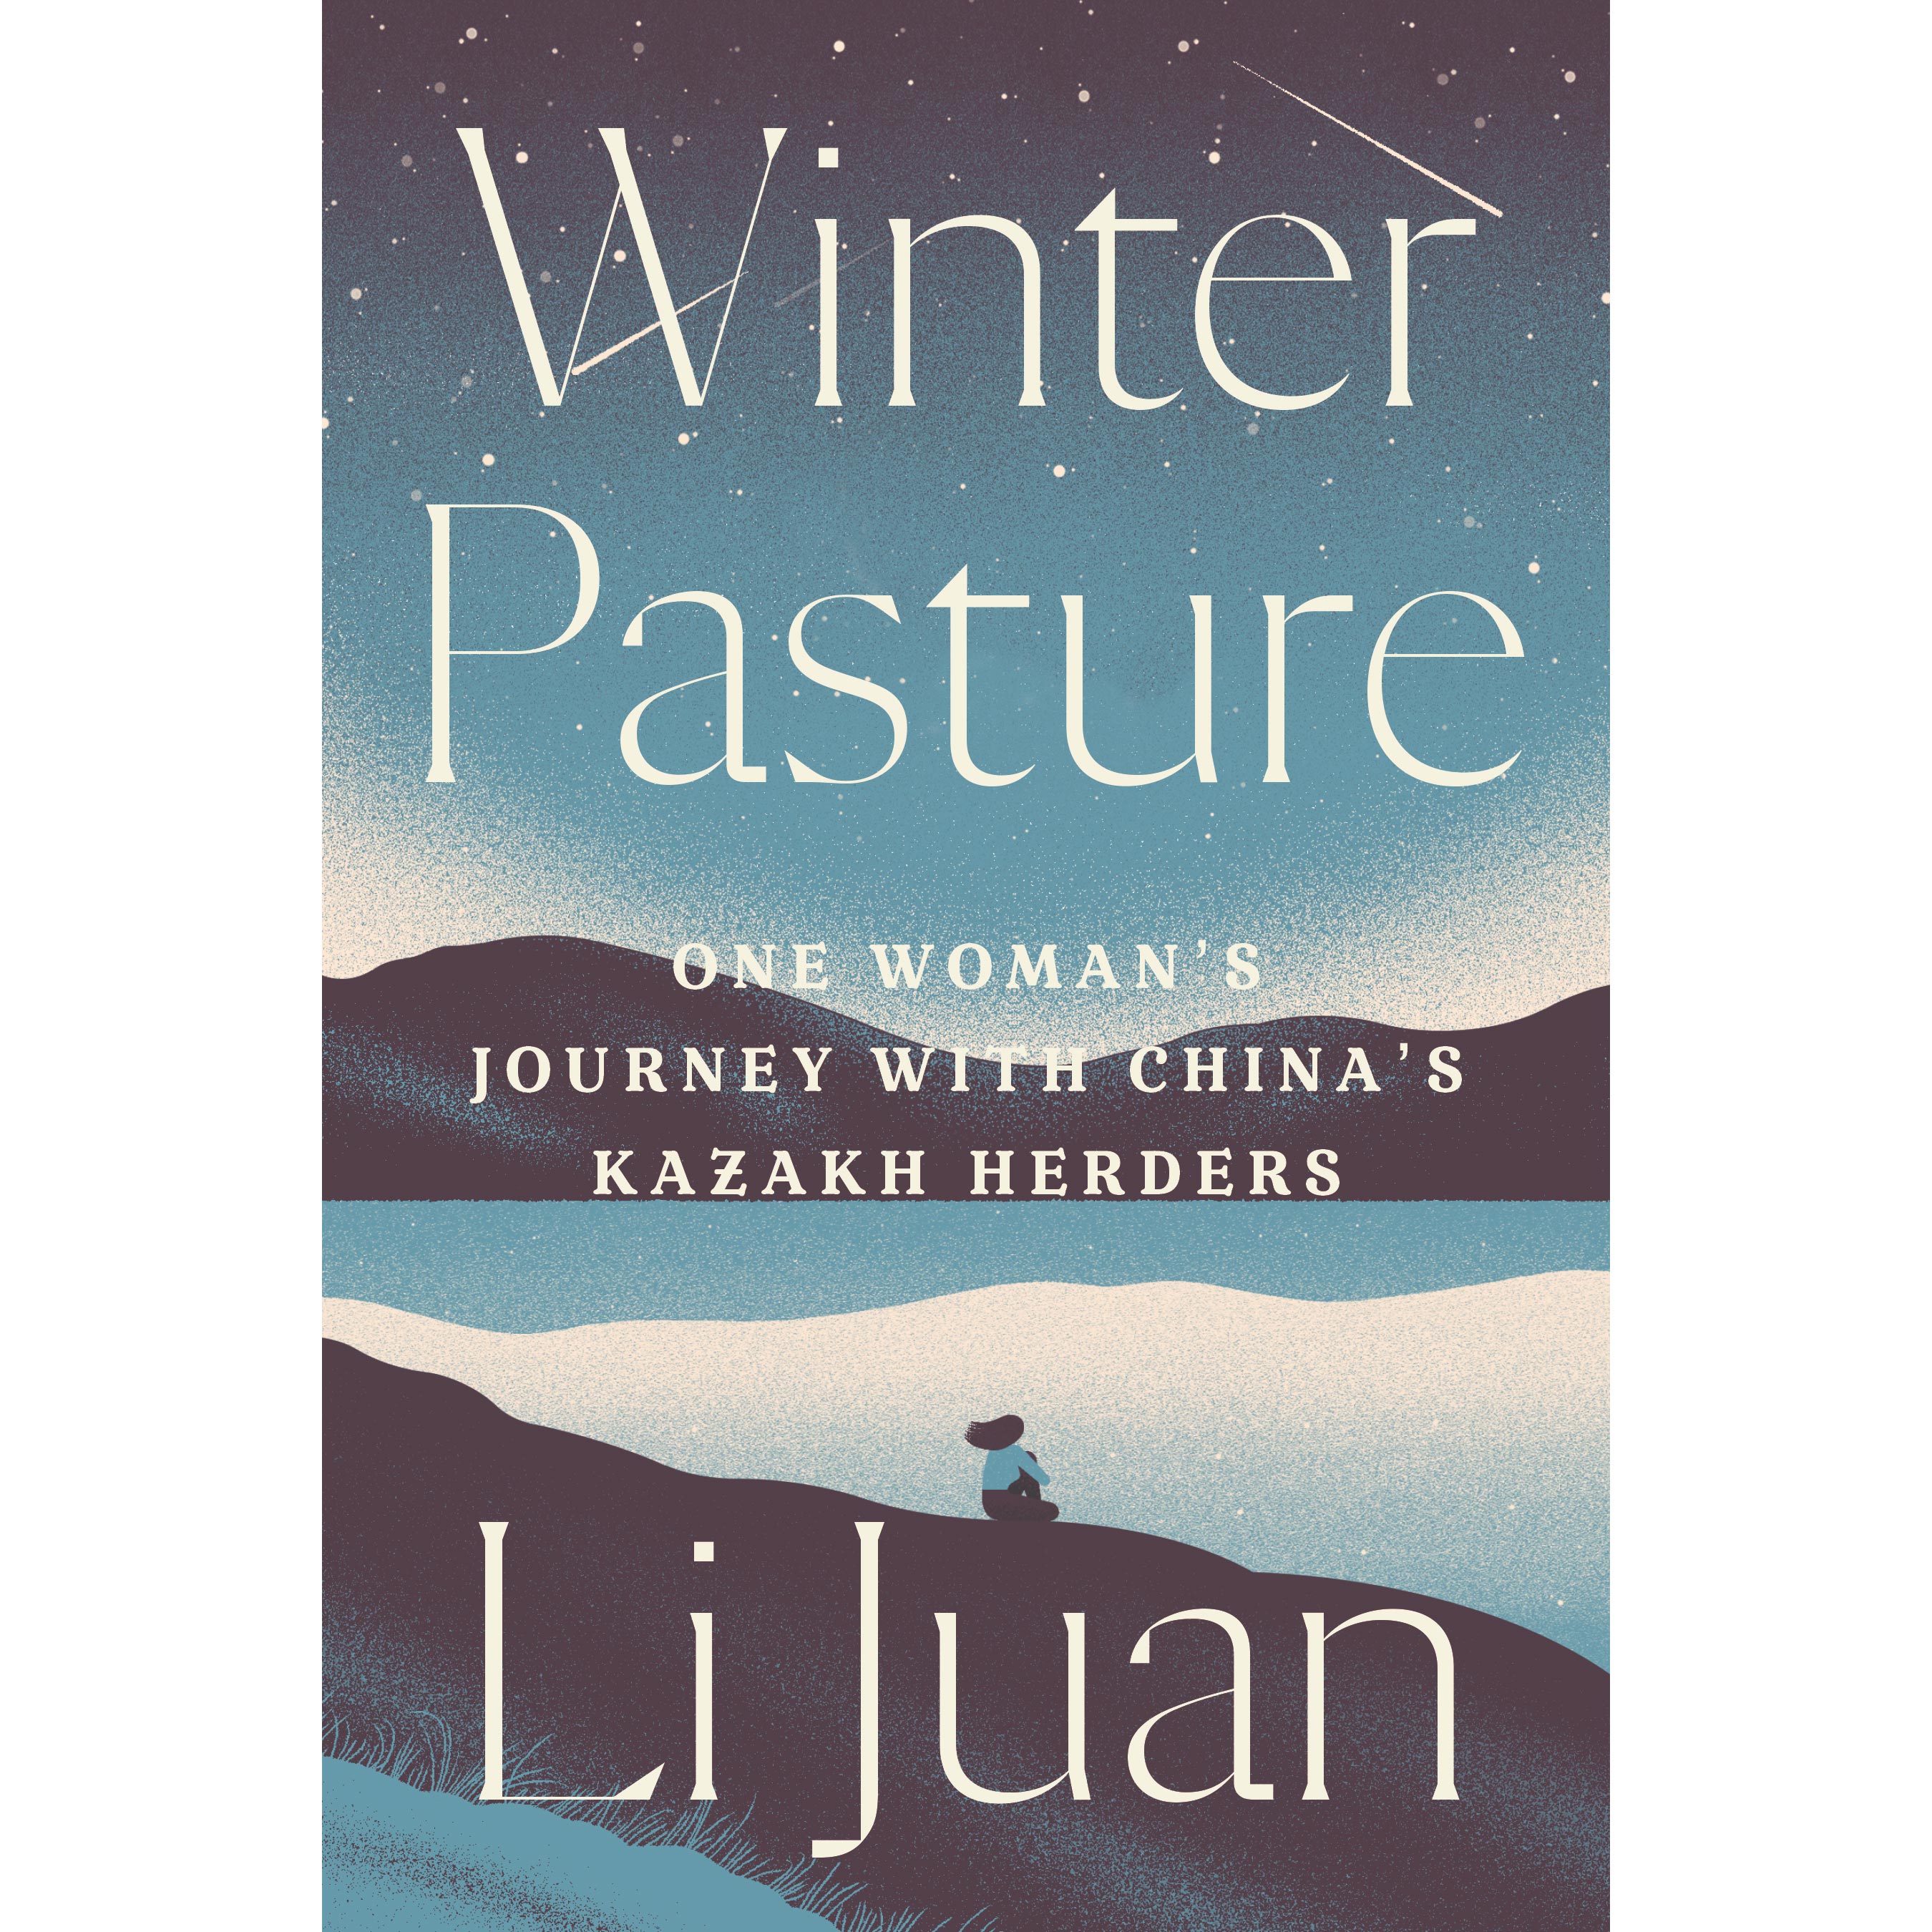 The cover of Winter Pasture.